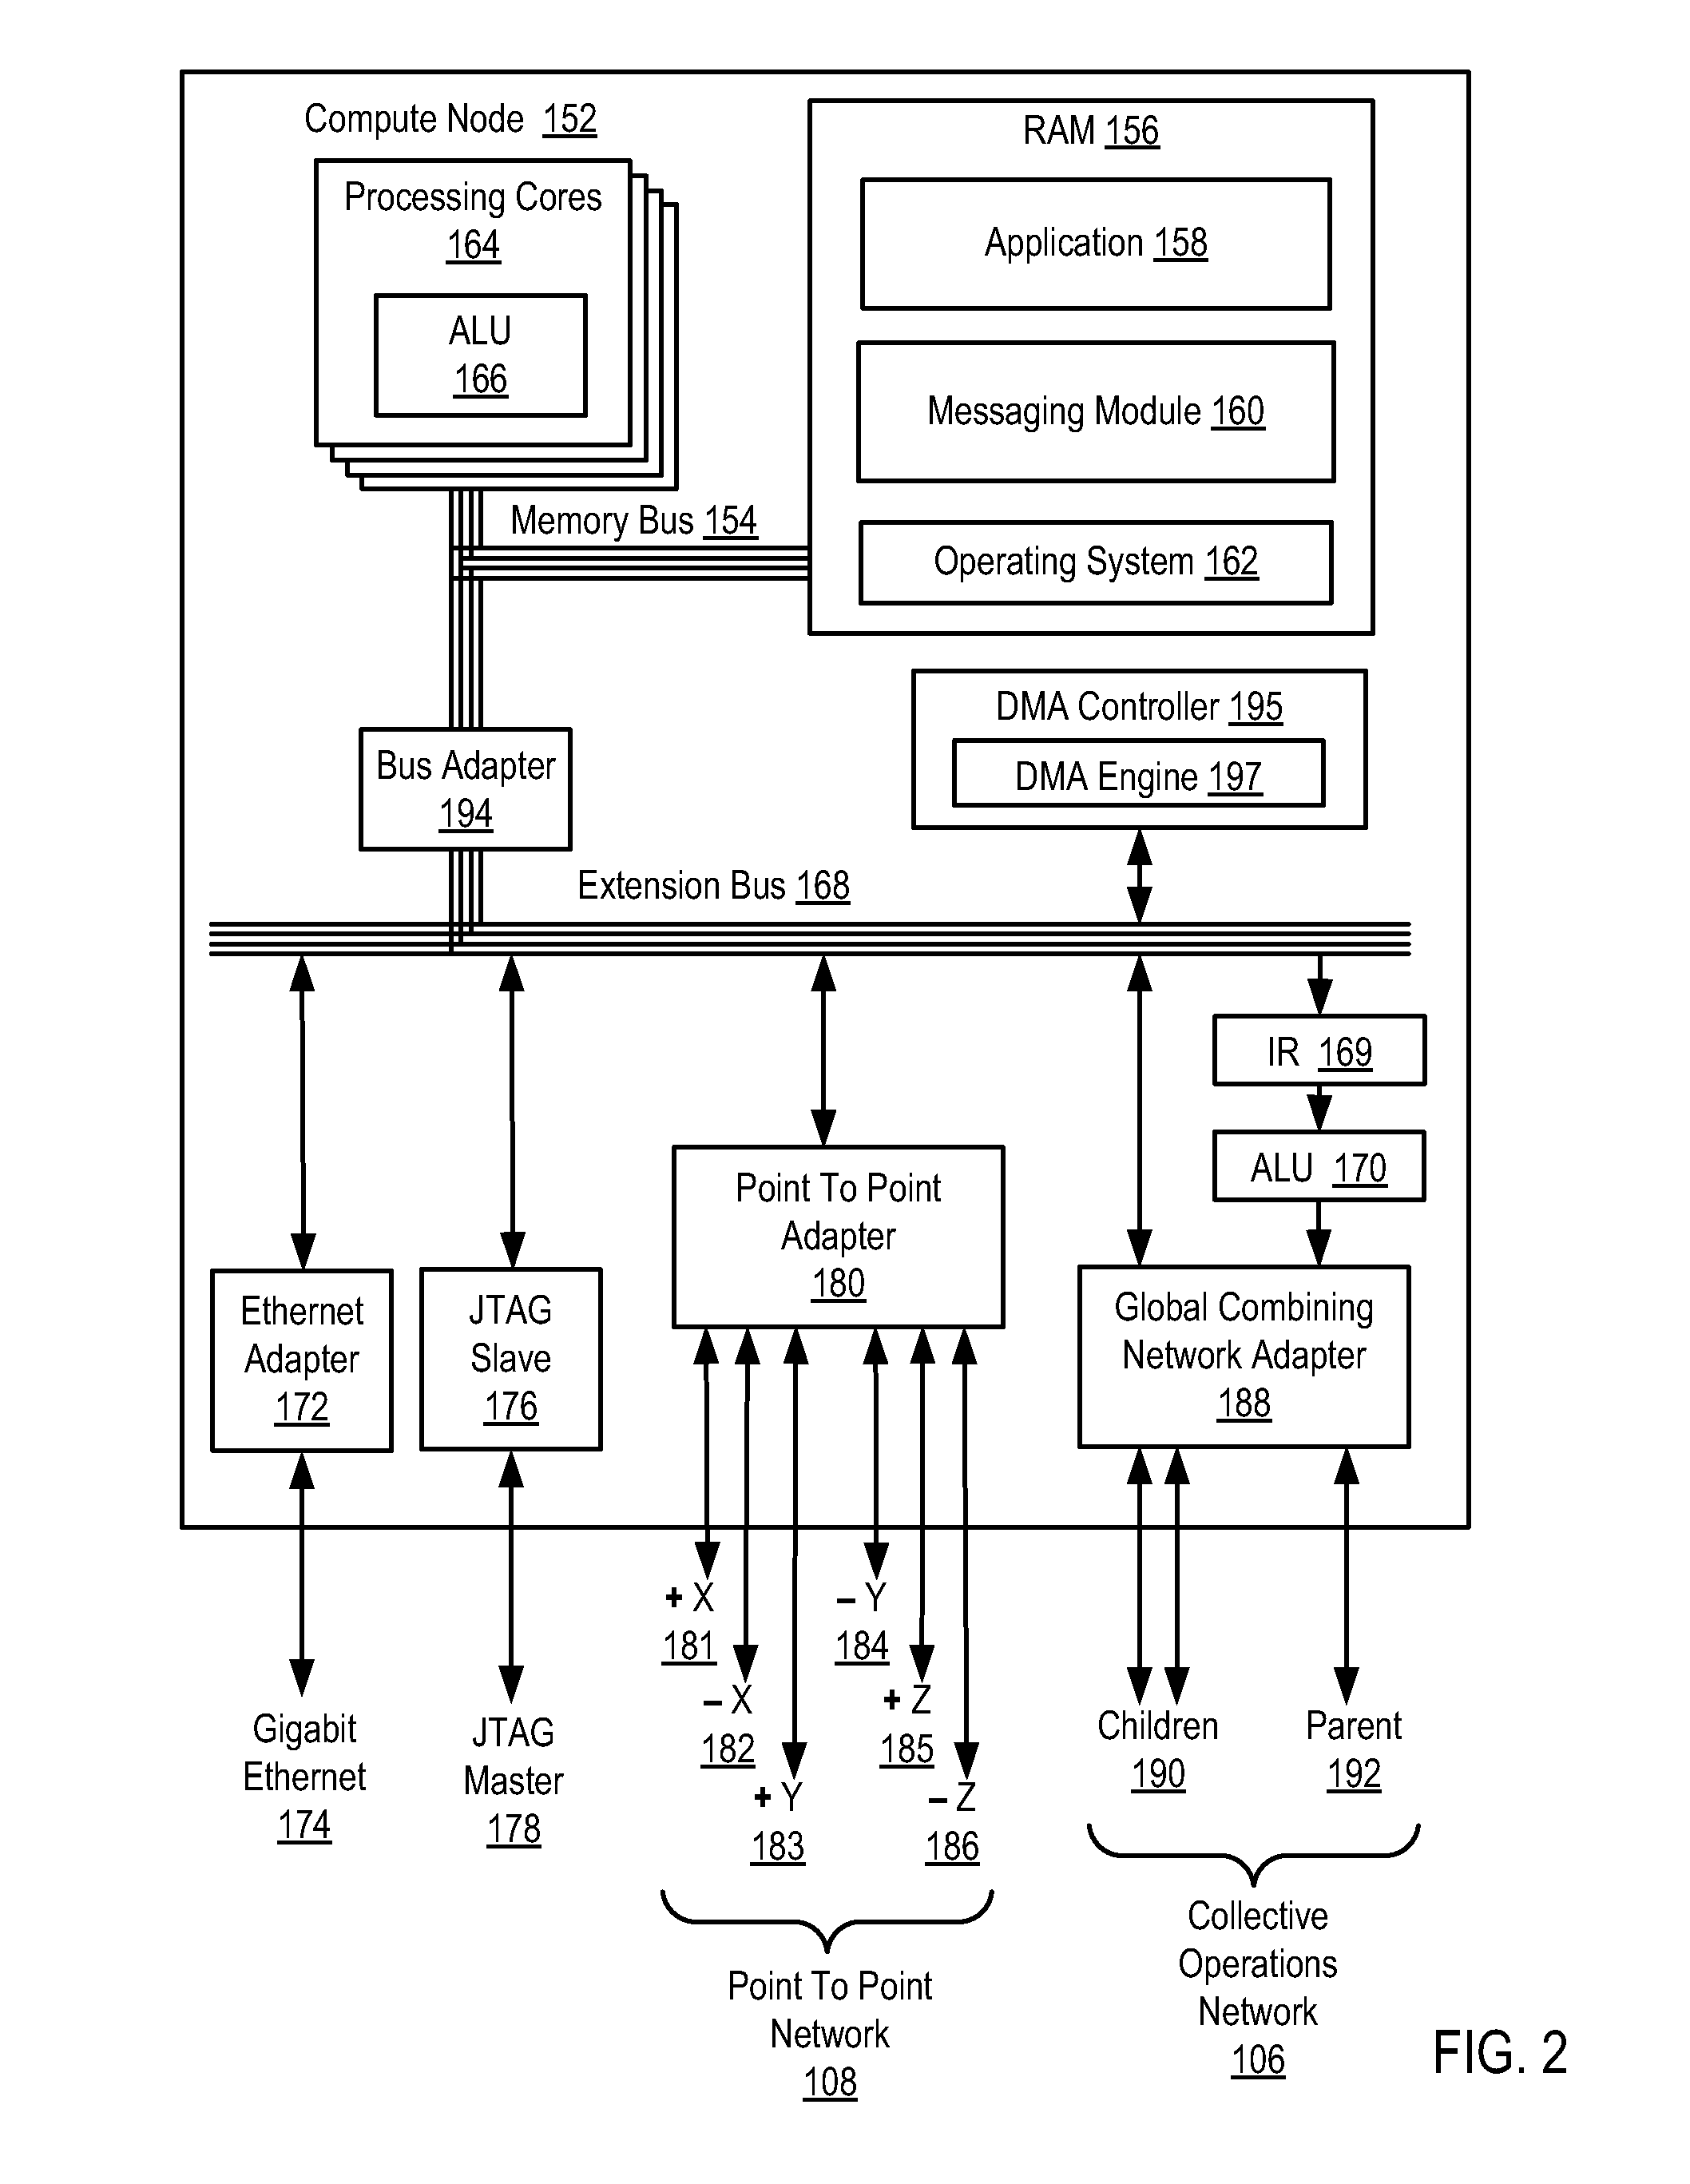 Self-Pacing Direct Memory Access Data Transfer Operations for Compute Nodes in a Parallel Computer